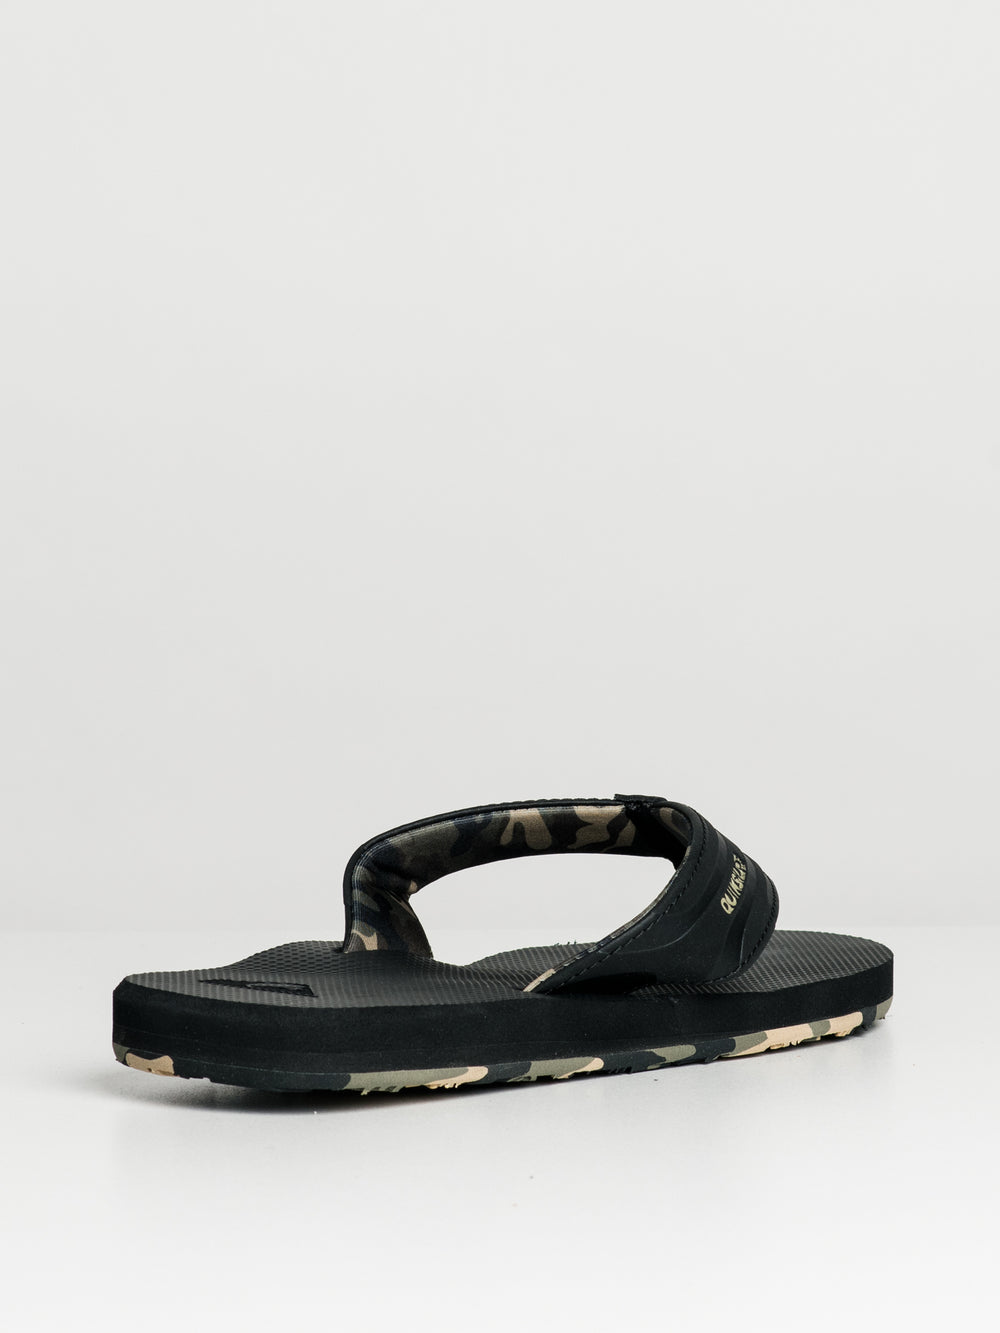 MENS QUIKSILVER ISLAND OASIS SANDALS - CLEARANCE